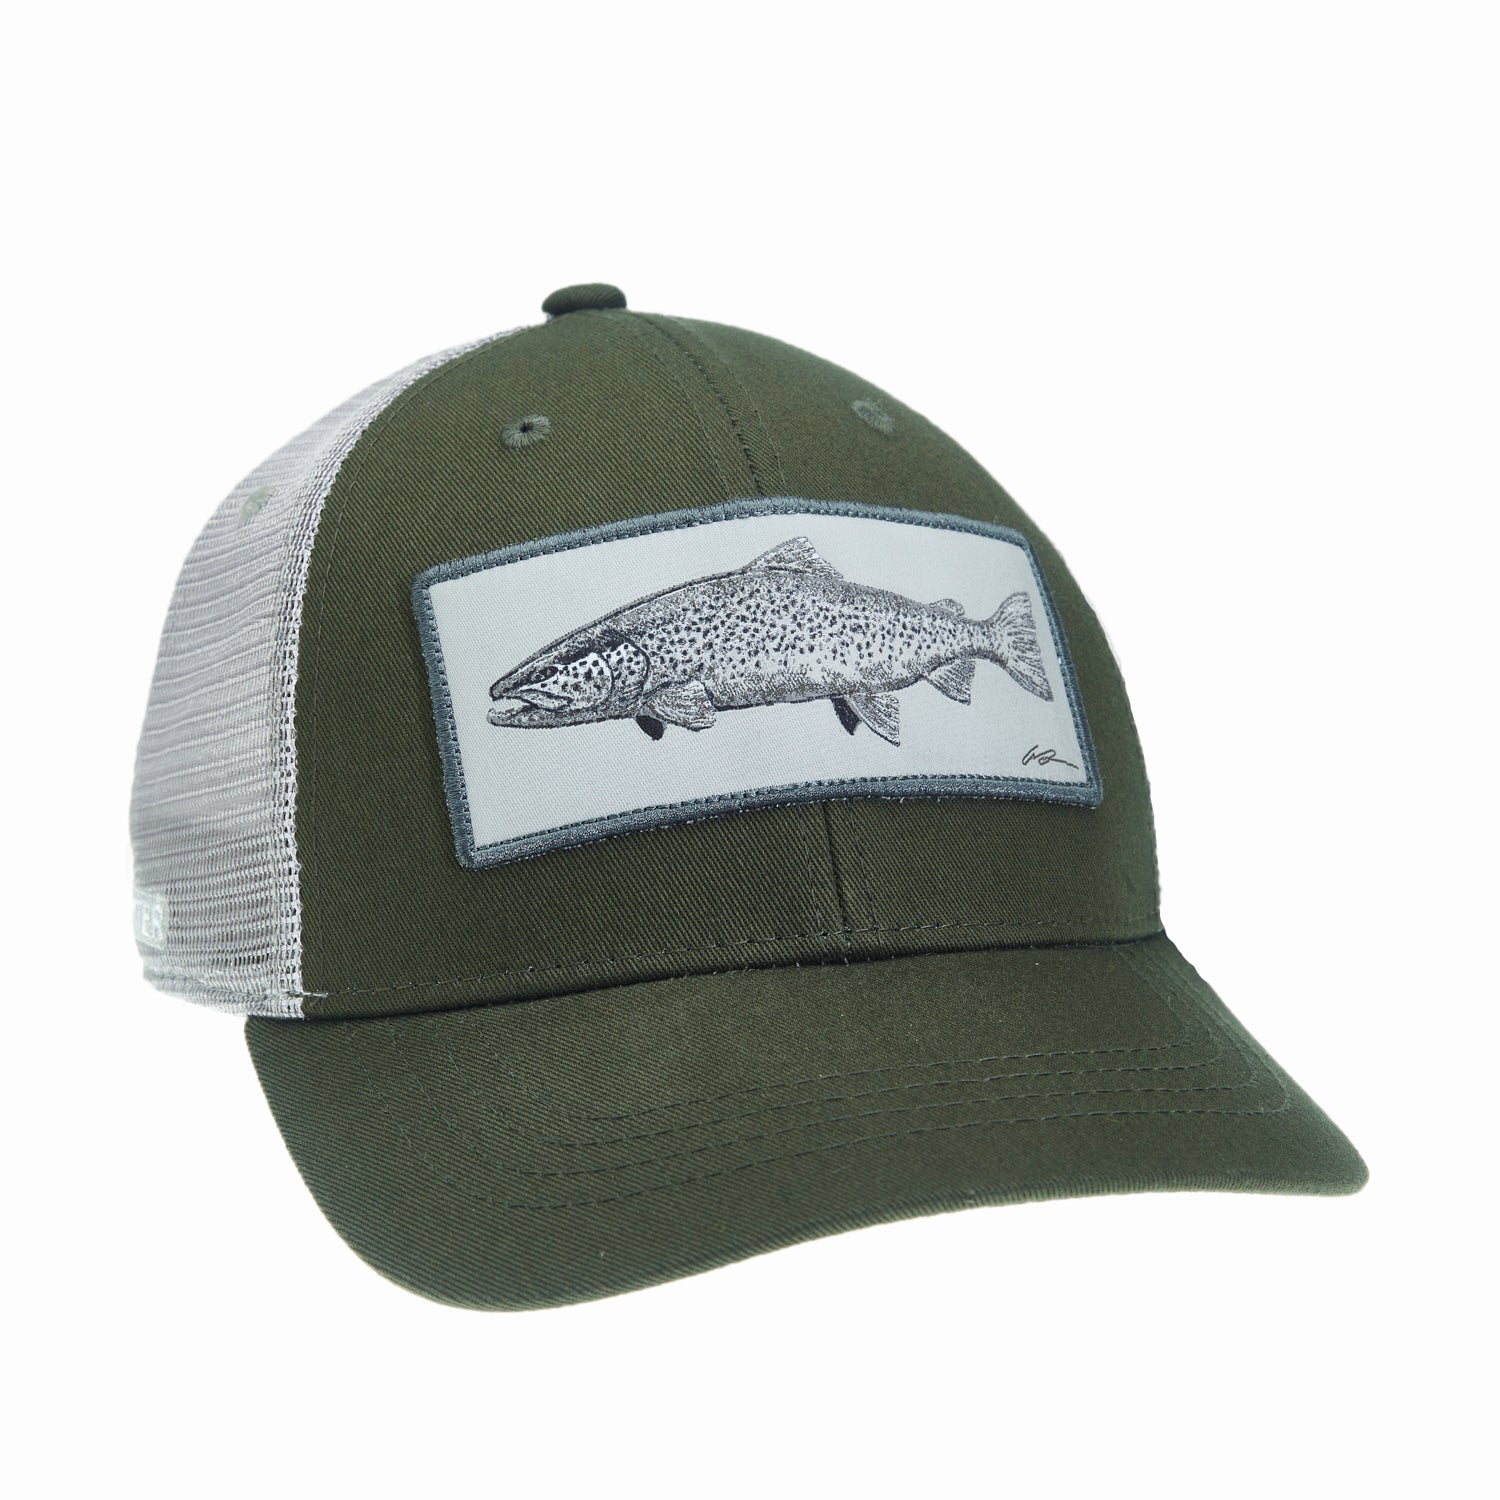 a hat with gray mesh and green fabric has a patch featuring a black and white drawing of a brown trout